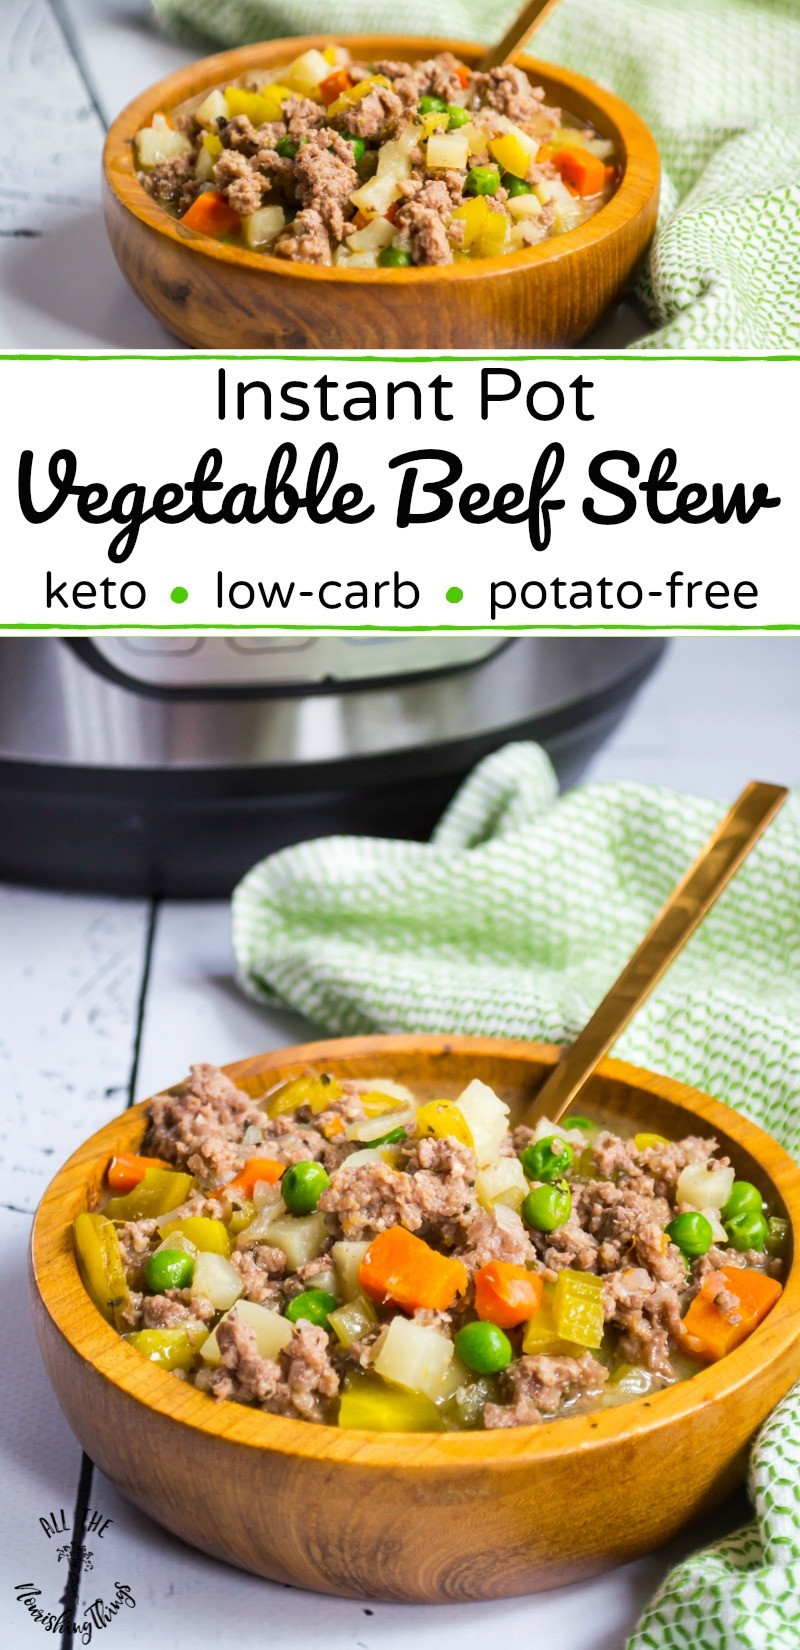 Stew Meat Recipes Instapot Keto
 Instant Pot Ve able Beef Stew keto Whole30 potato free